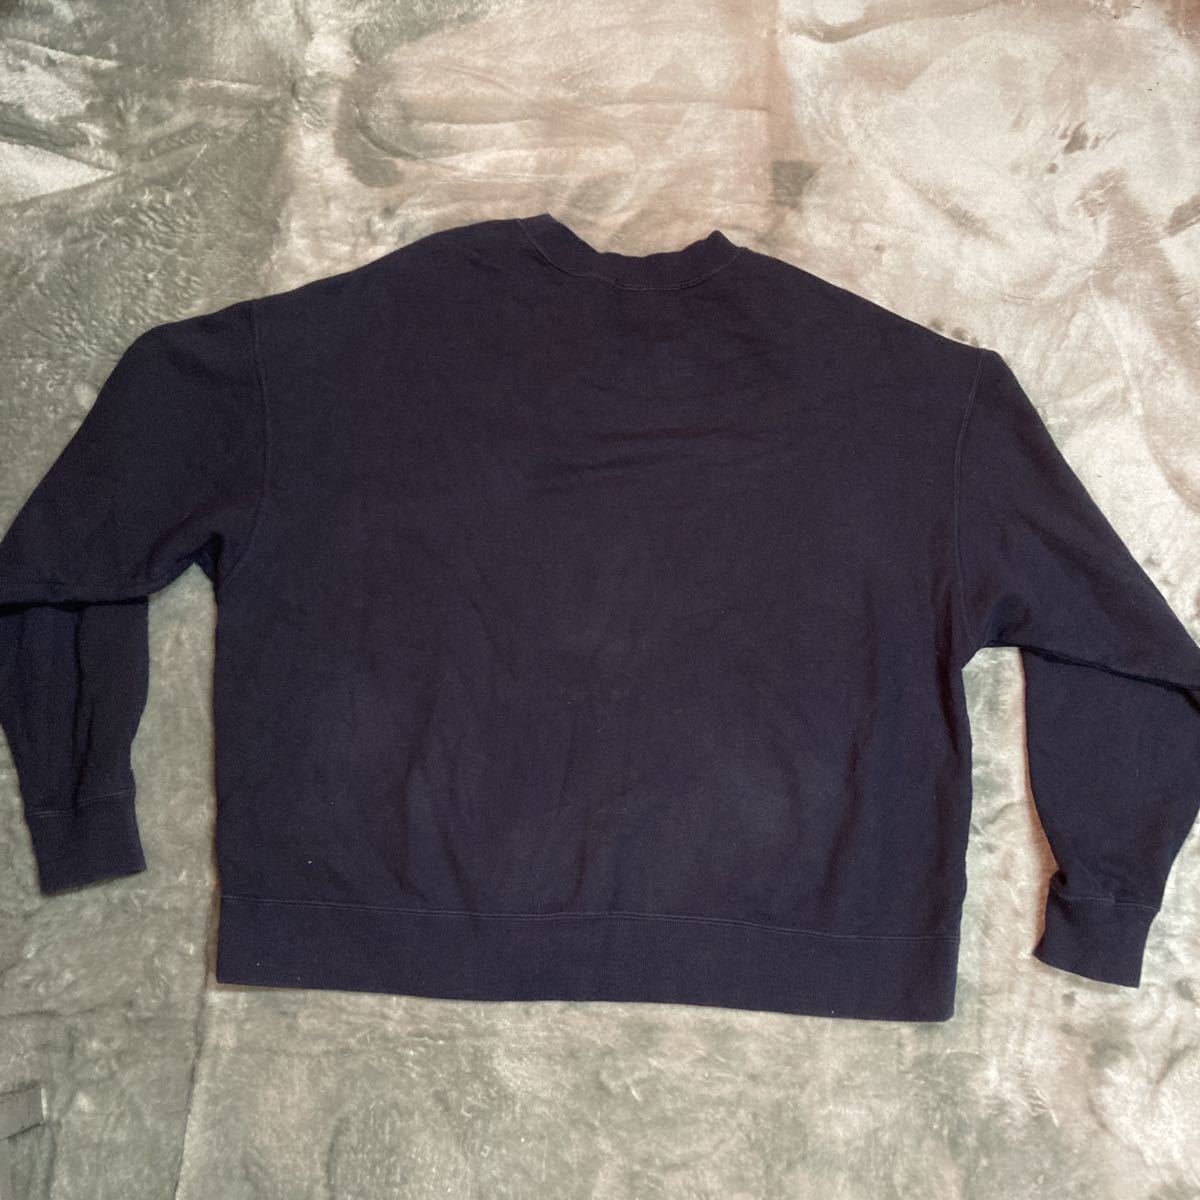 BEAUTY&YOUTH United Arrows sweat tops size S